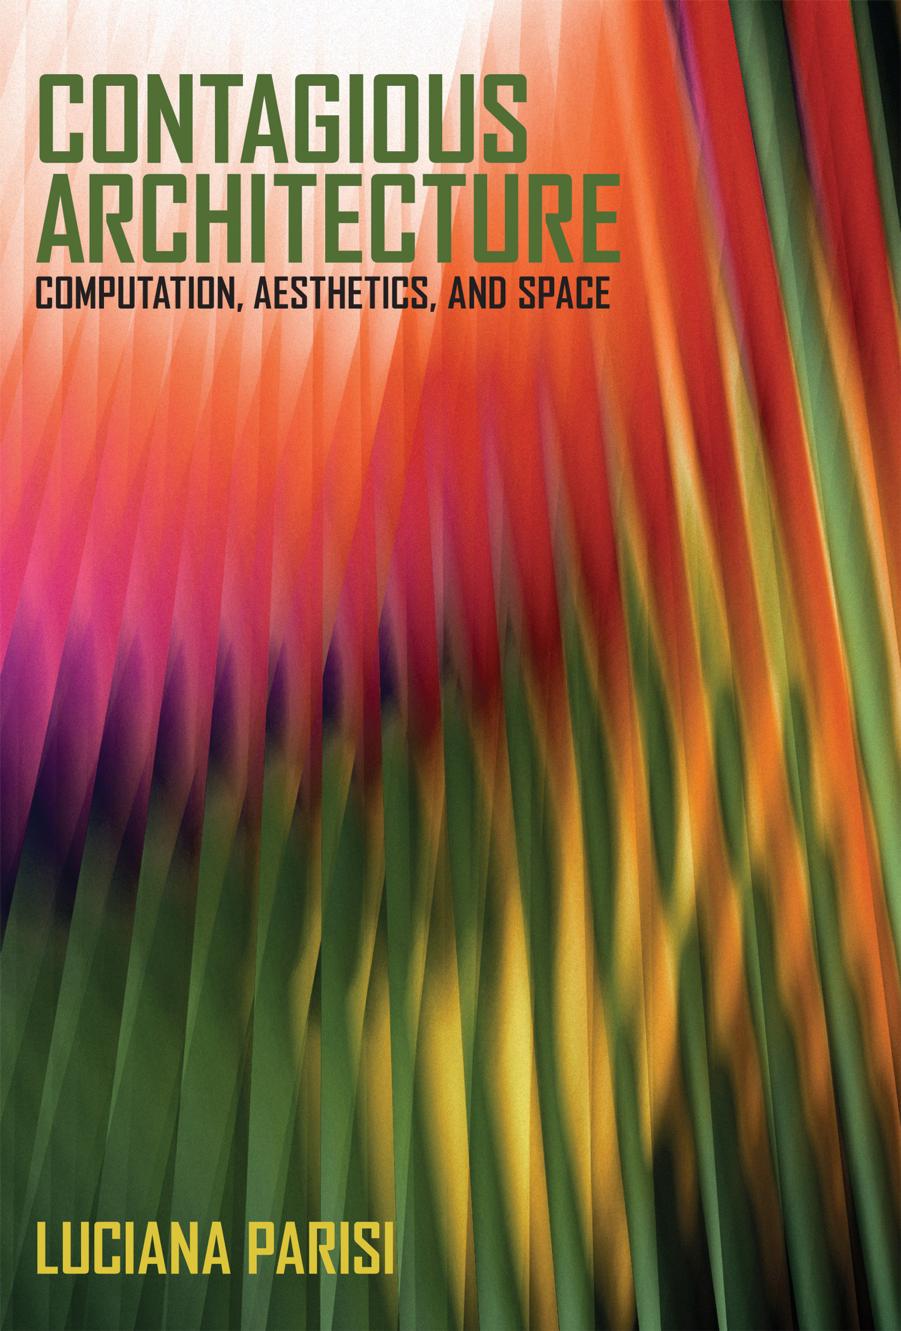 Contagious Architecture: Computation, Aesthetics, and Space by Luciana Parisi